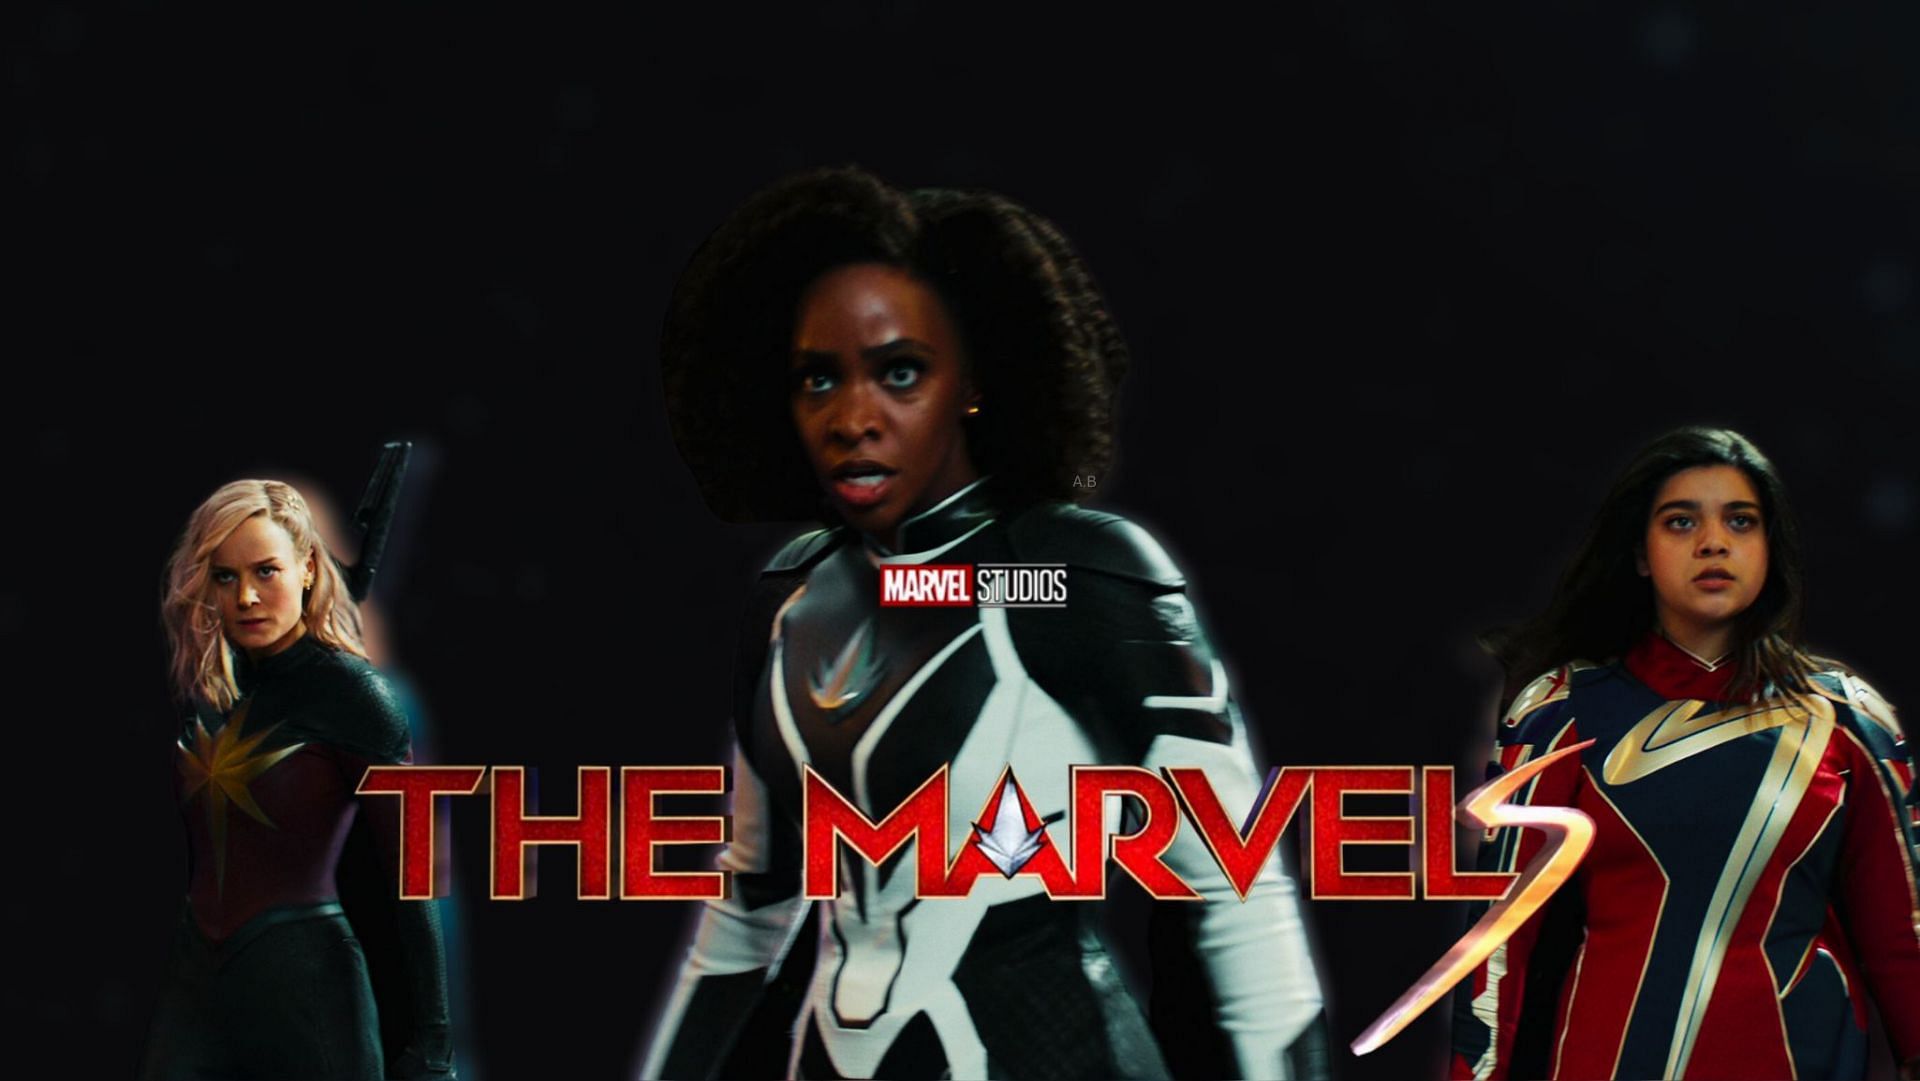 A new era begins: The Marvels introduce Ms. Marvel